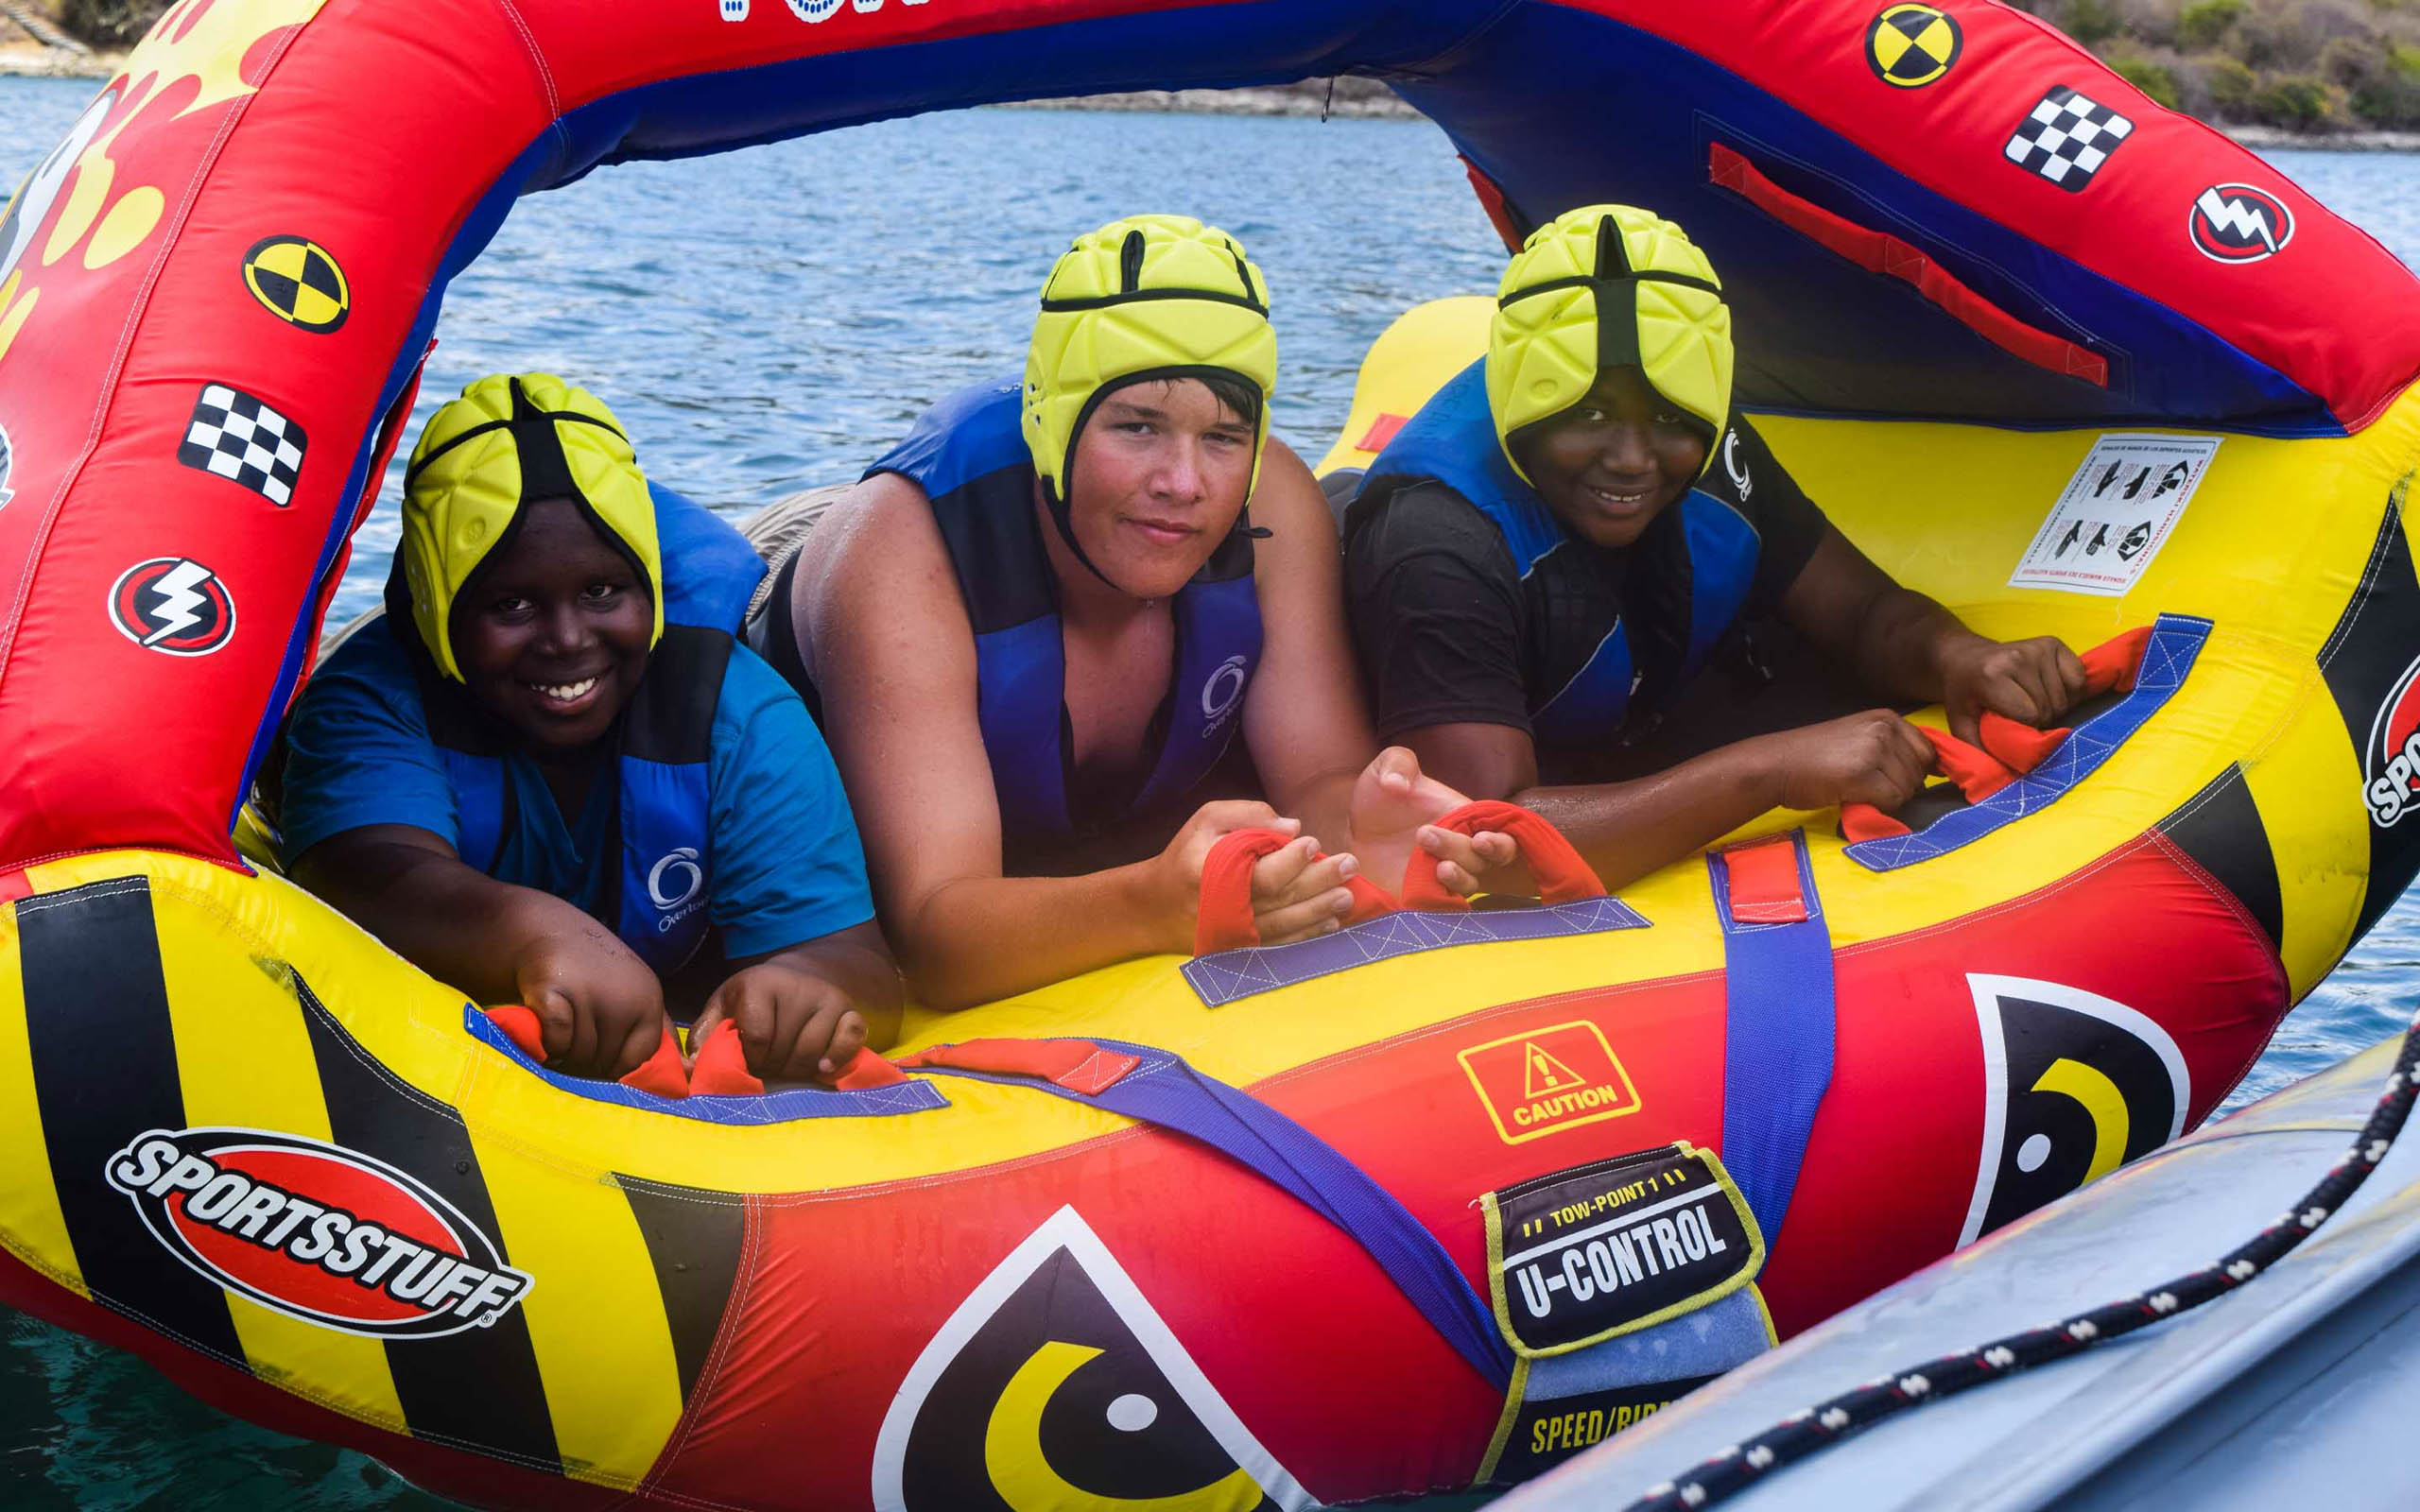 A group of people riding in an inflatable raft.